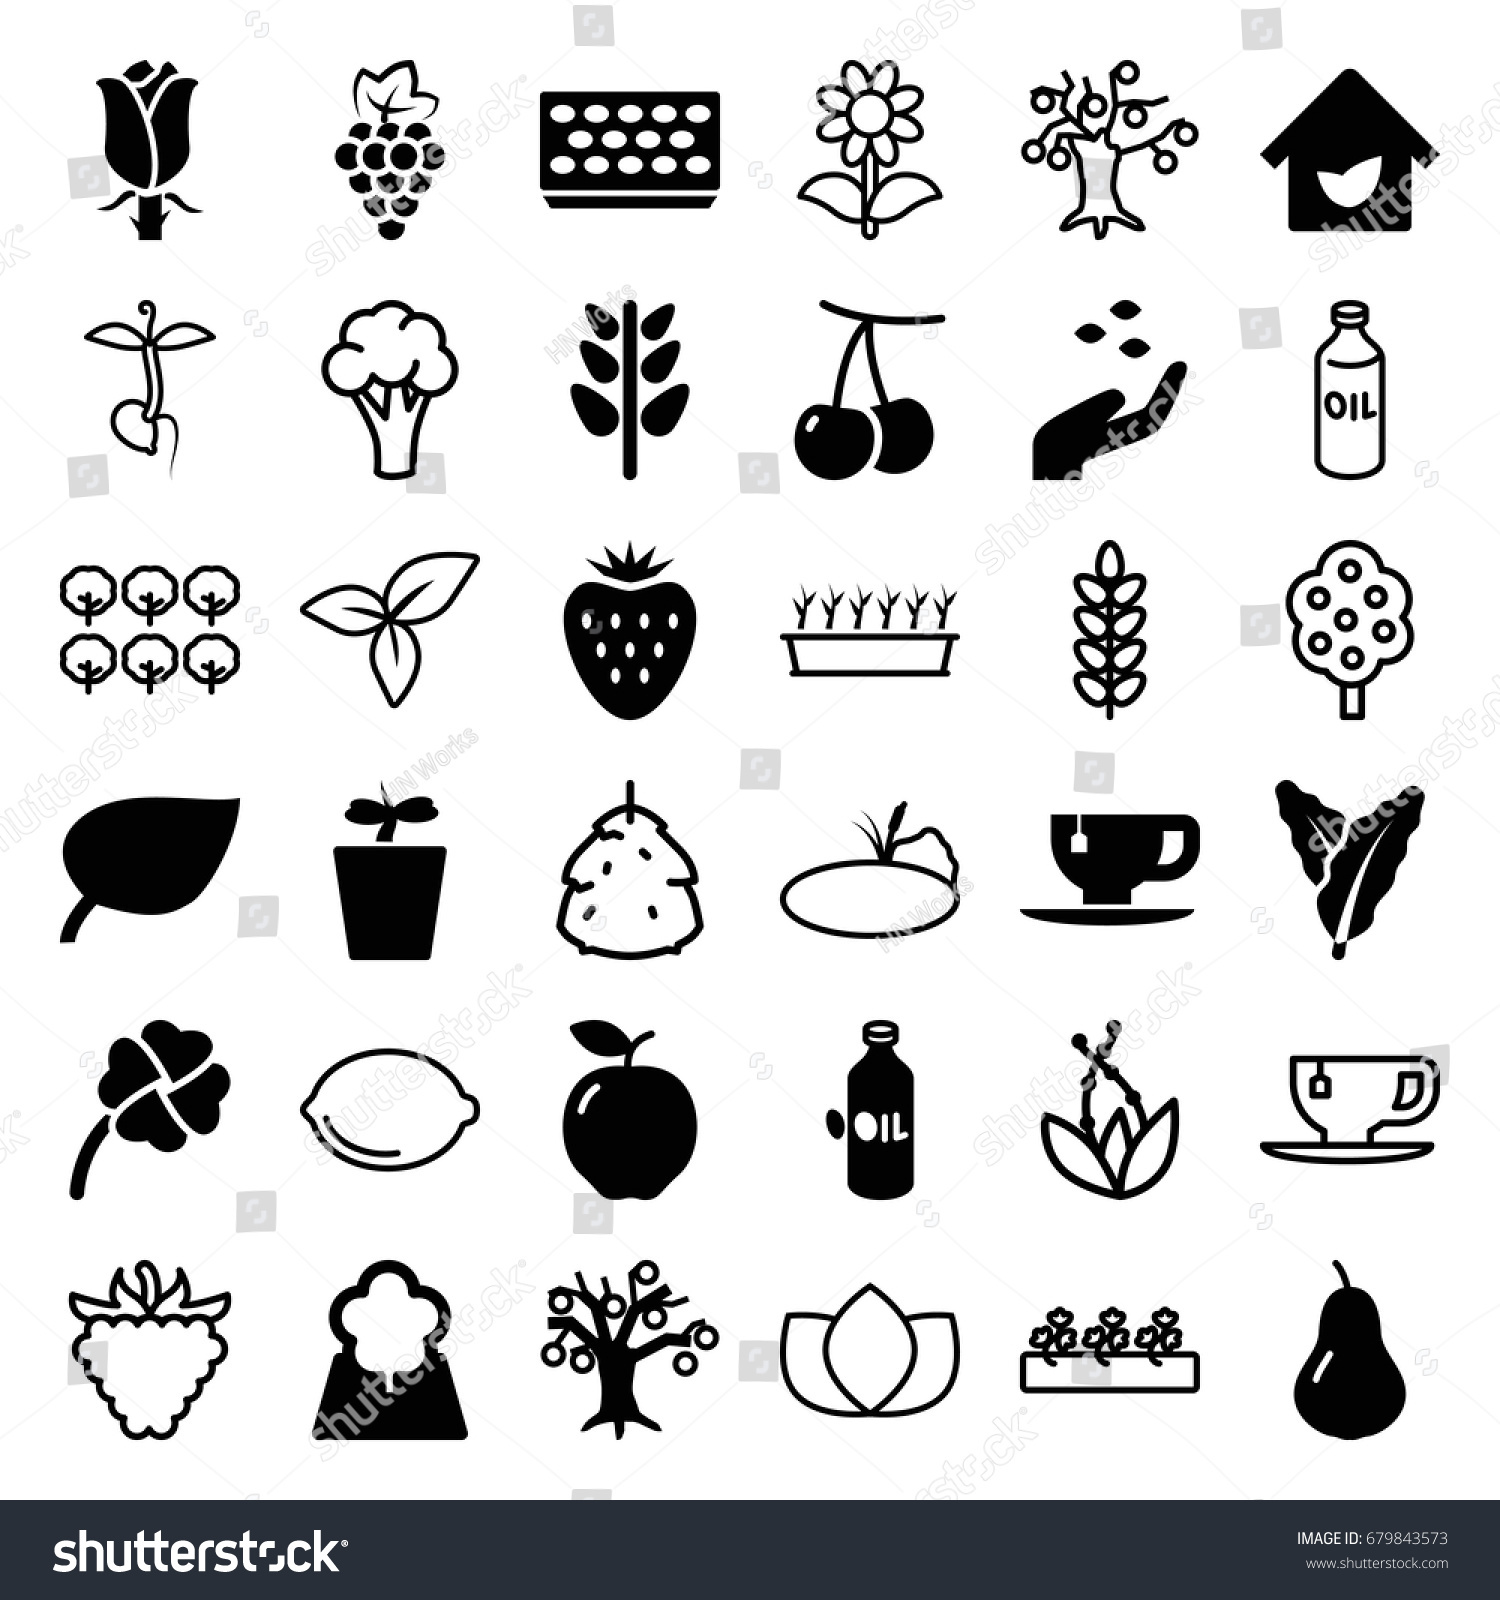 Leaf icons set. set of 36 leaf filled and outline icons such as apple, pear, cherry, grape, spinach, oil, hand with seeds, tea cup, pot for plants, plant in pot, rose, plant #679843573